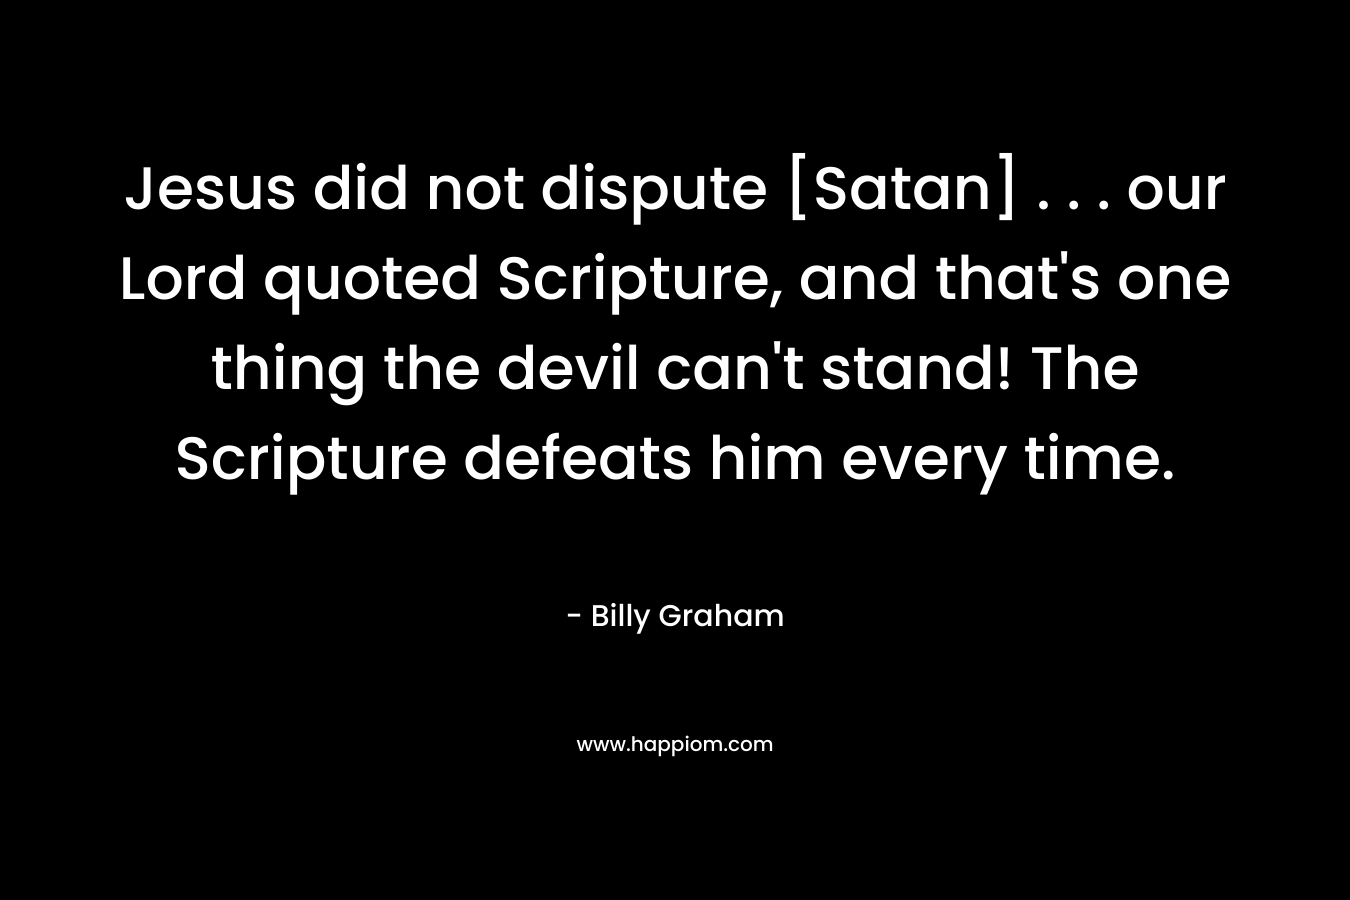 Jesus did not dispute [Satan] . . . our Lord quoted Scripture, and that's one thing the devil can't stand! The Scripture defeats him every time.